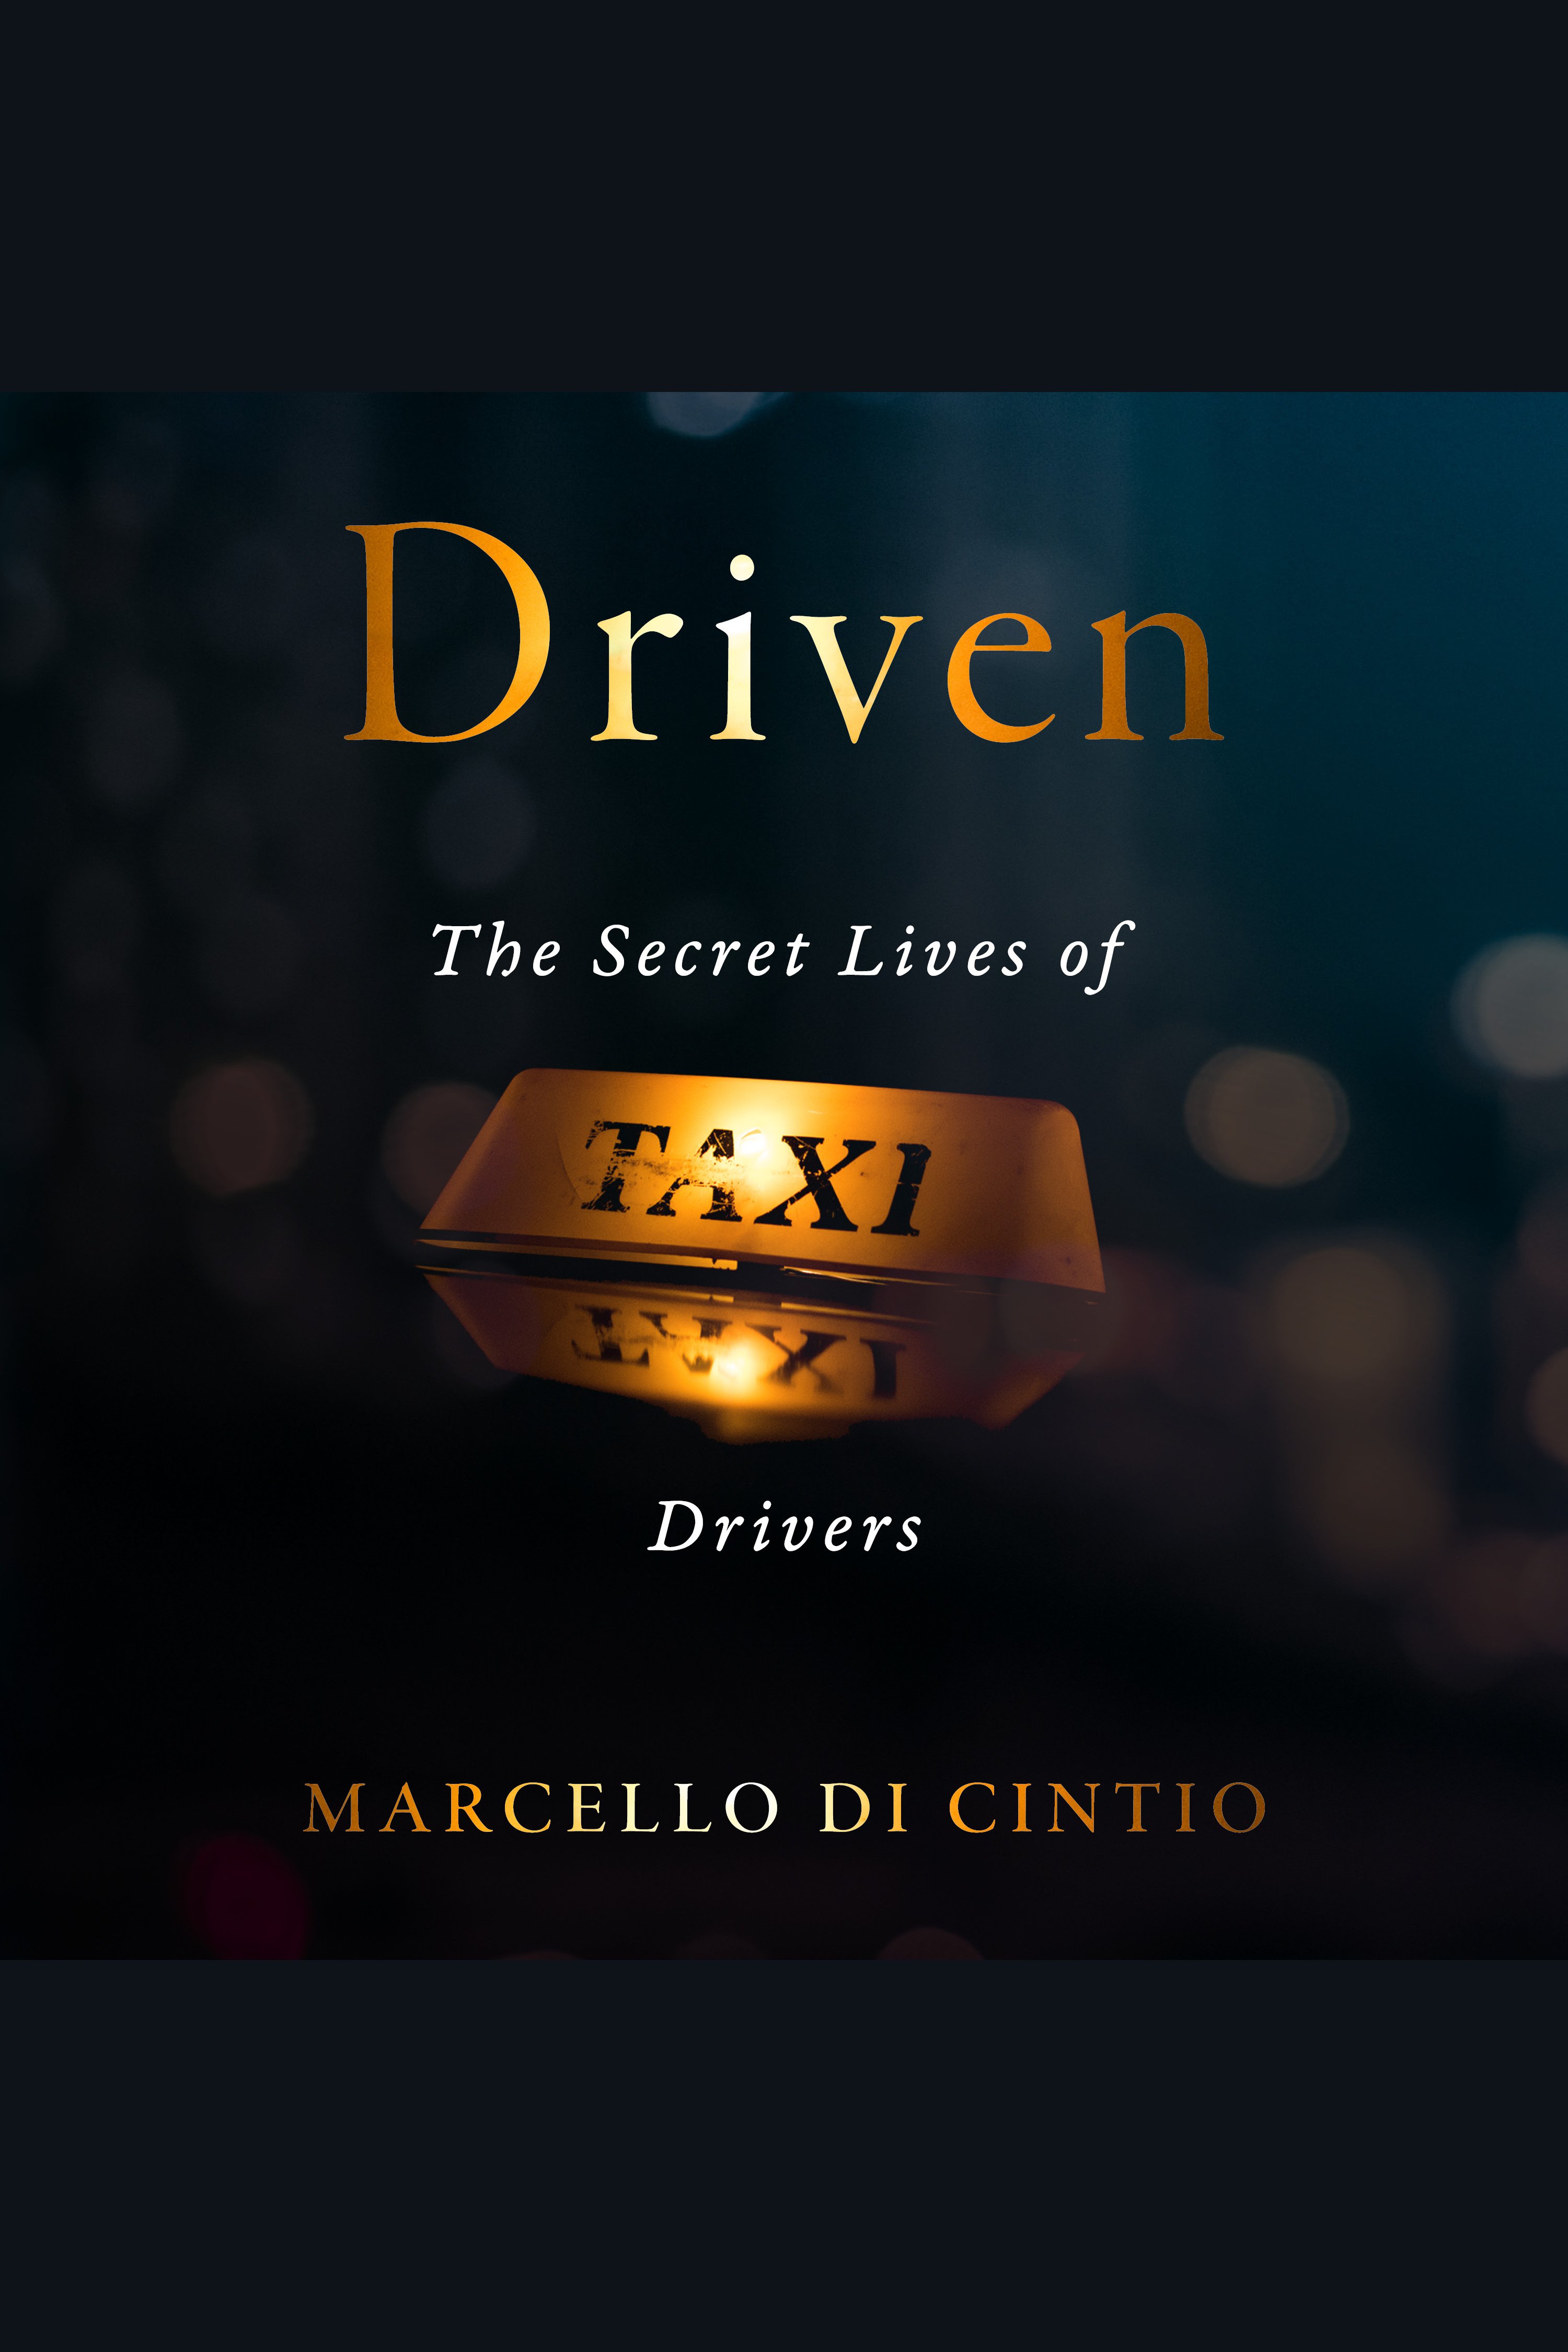 Driven The Secret Lives of Taxi Drivers